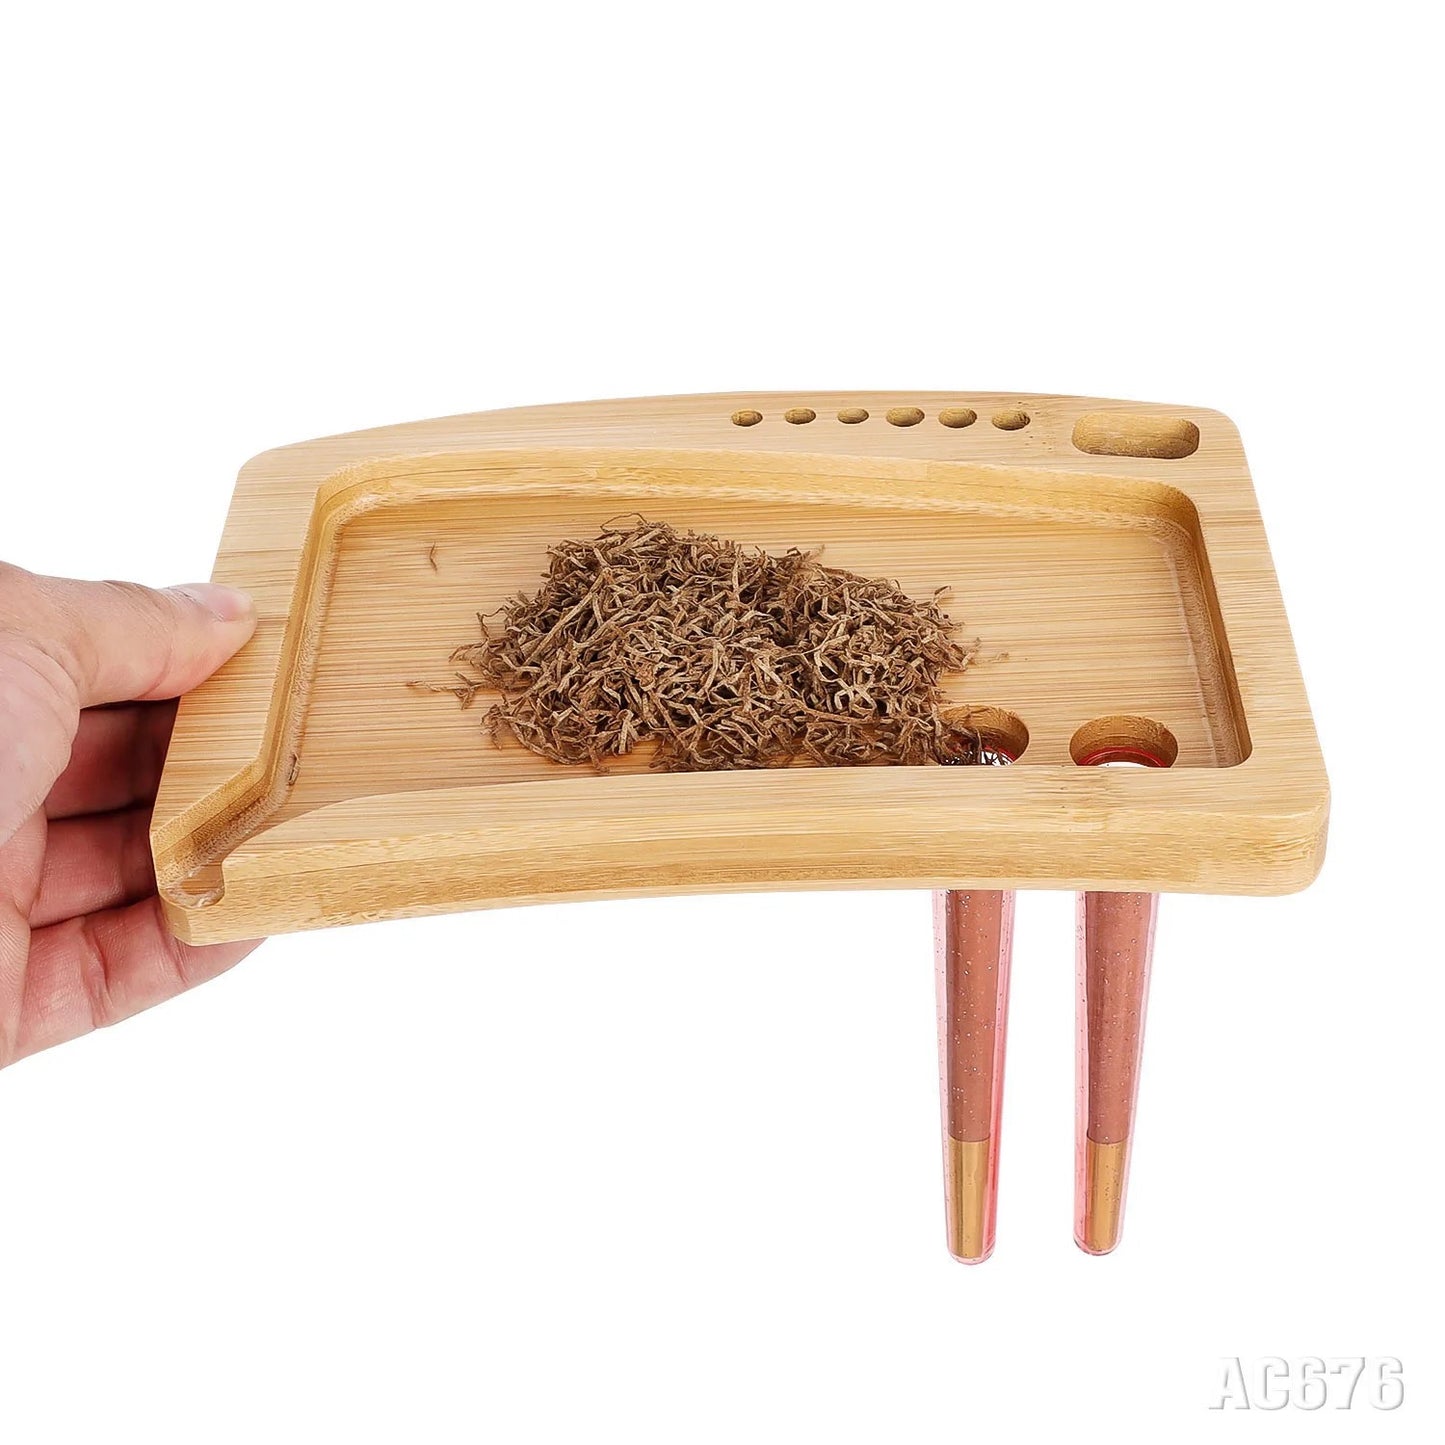 Bamboo Rolling Tray- Pre Rolled Cones Tray - Tokemates